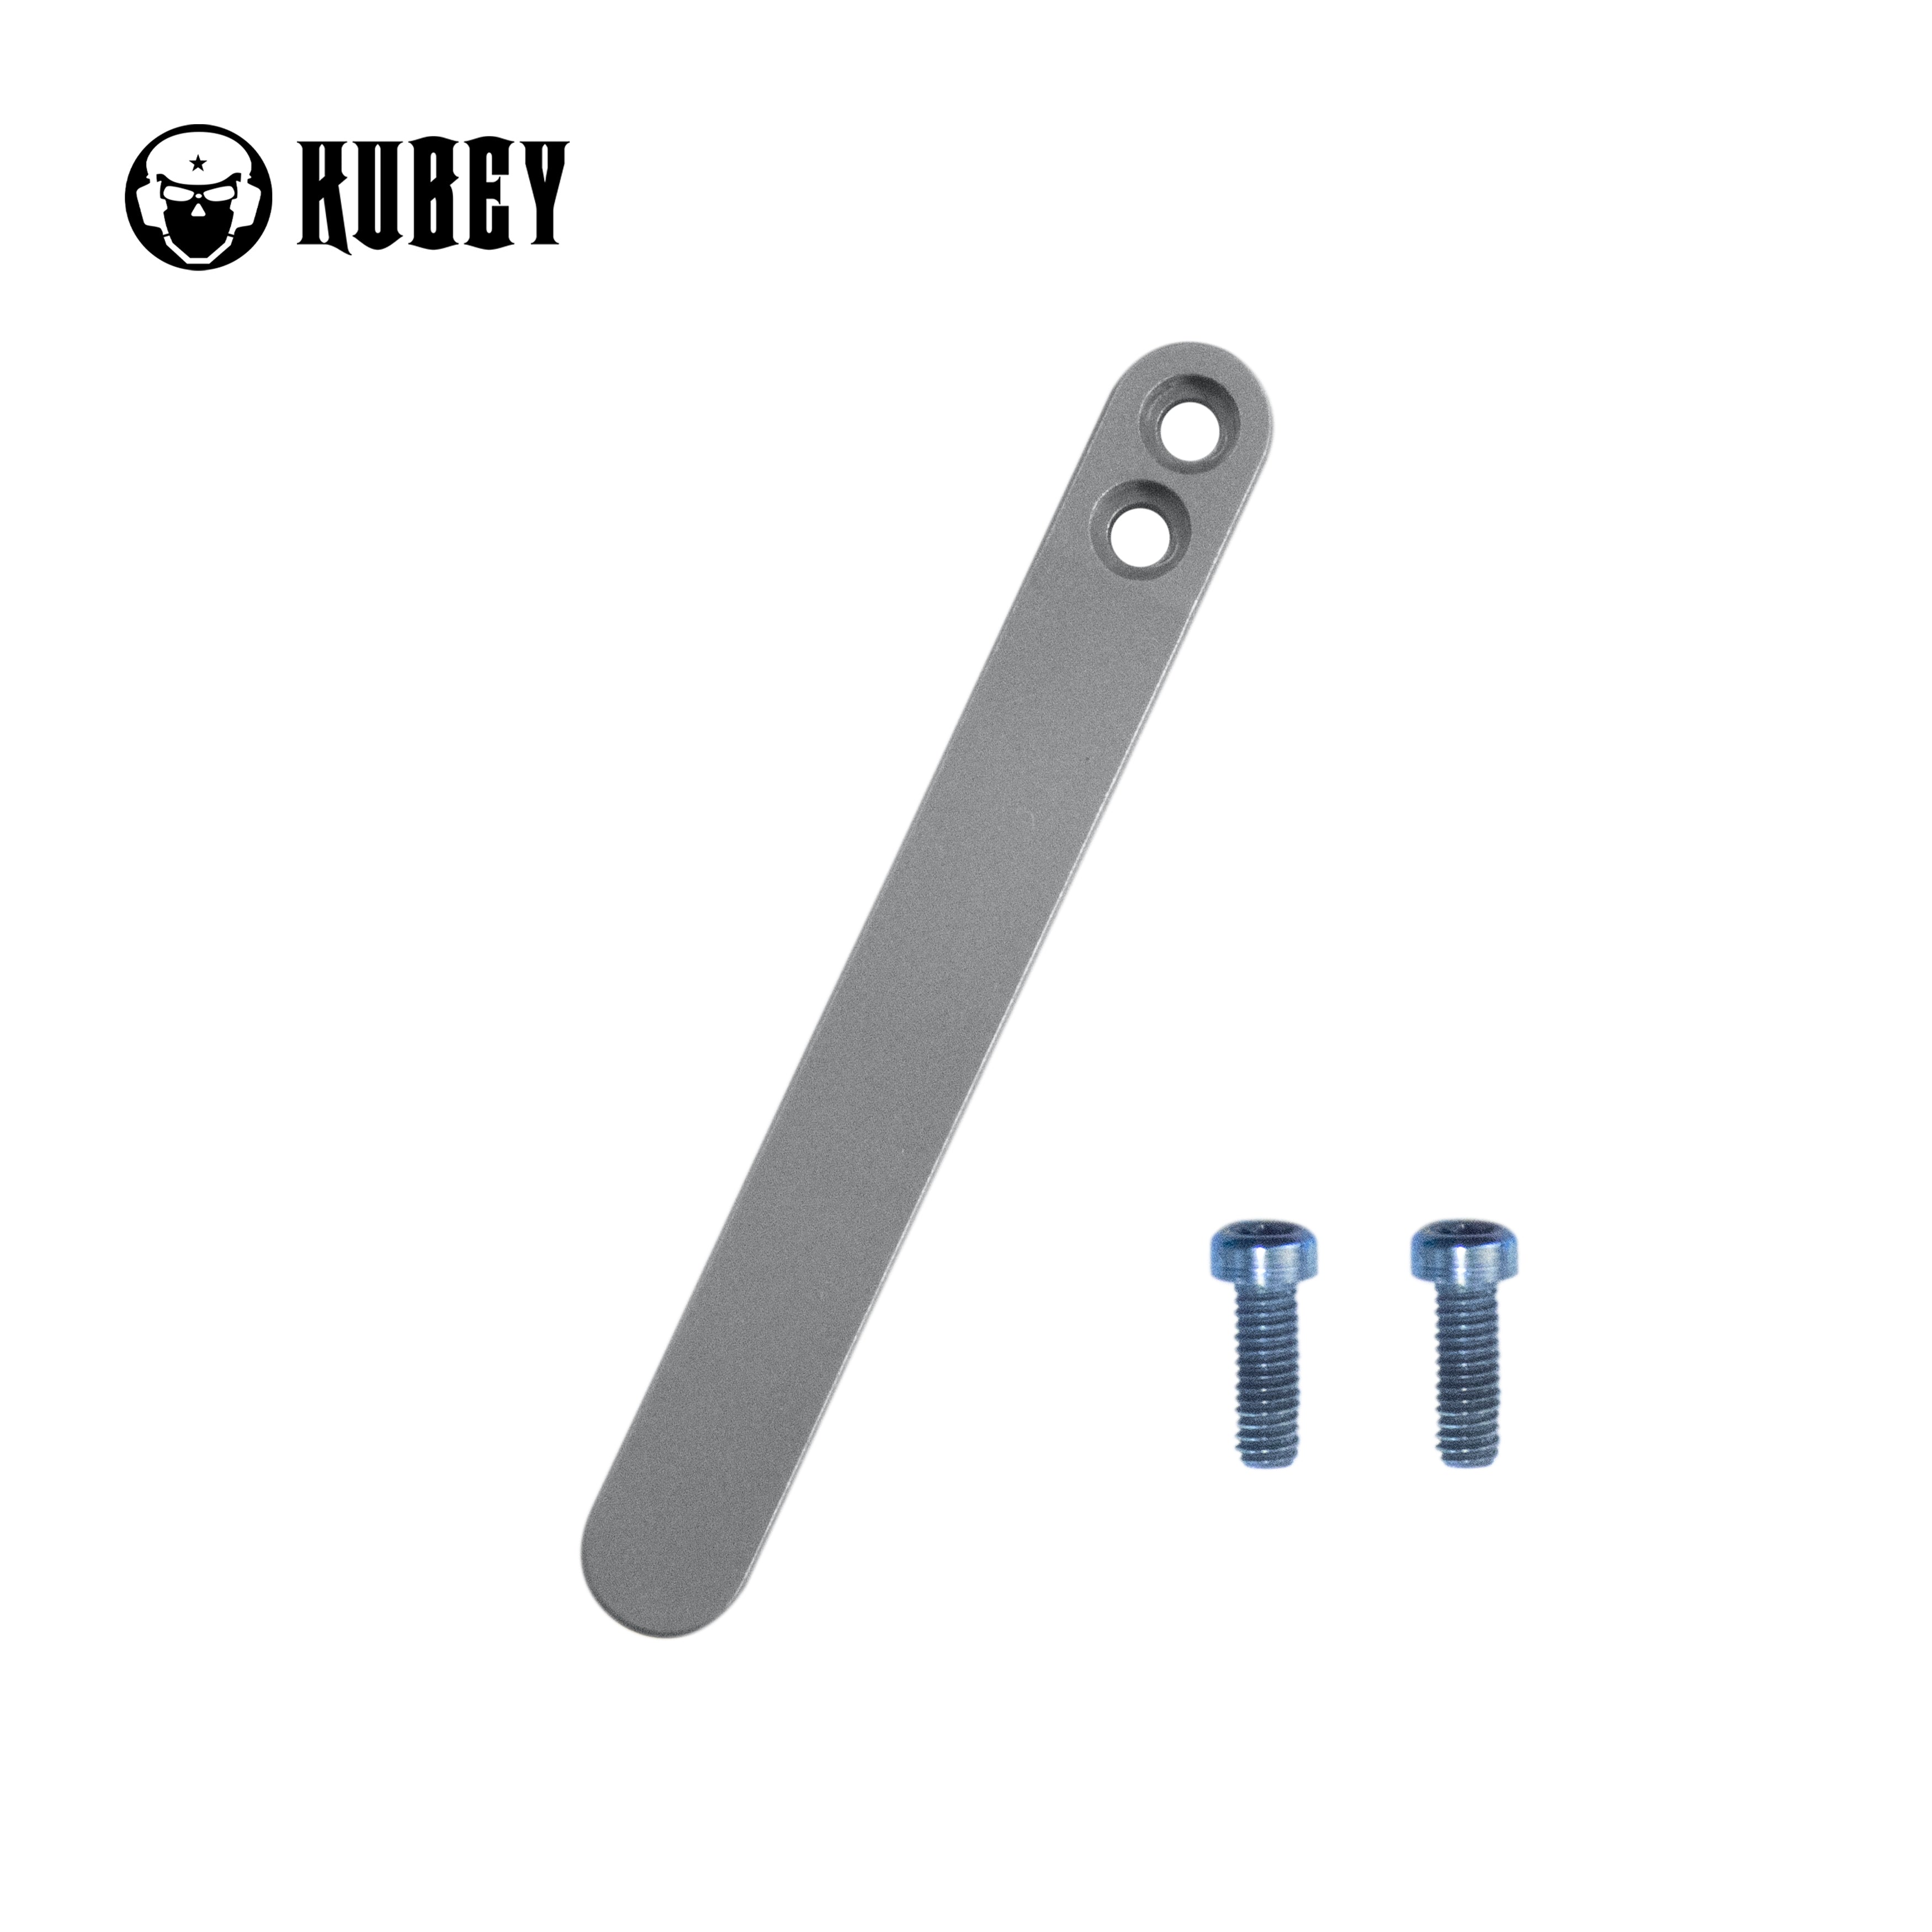 Kubey Titanium Clip for Folding Knives, 1 Piece with 2 Screws, Grey, KH031